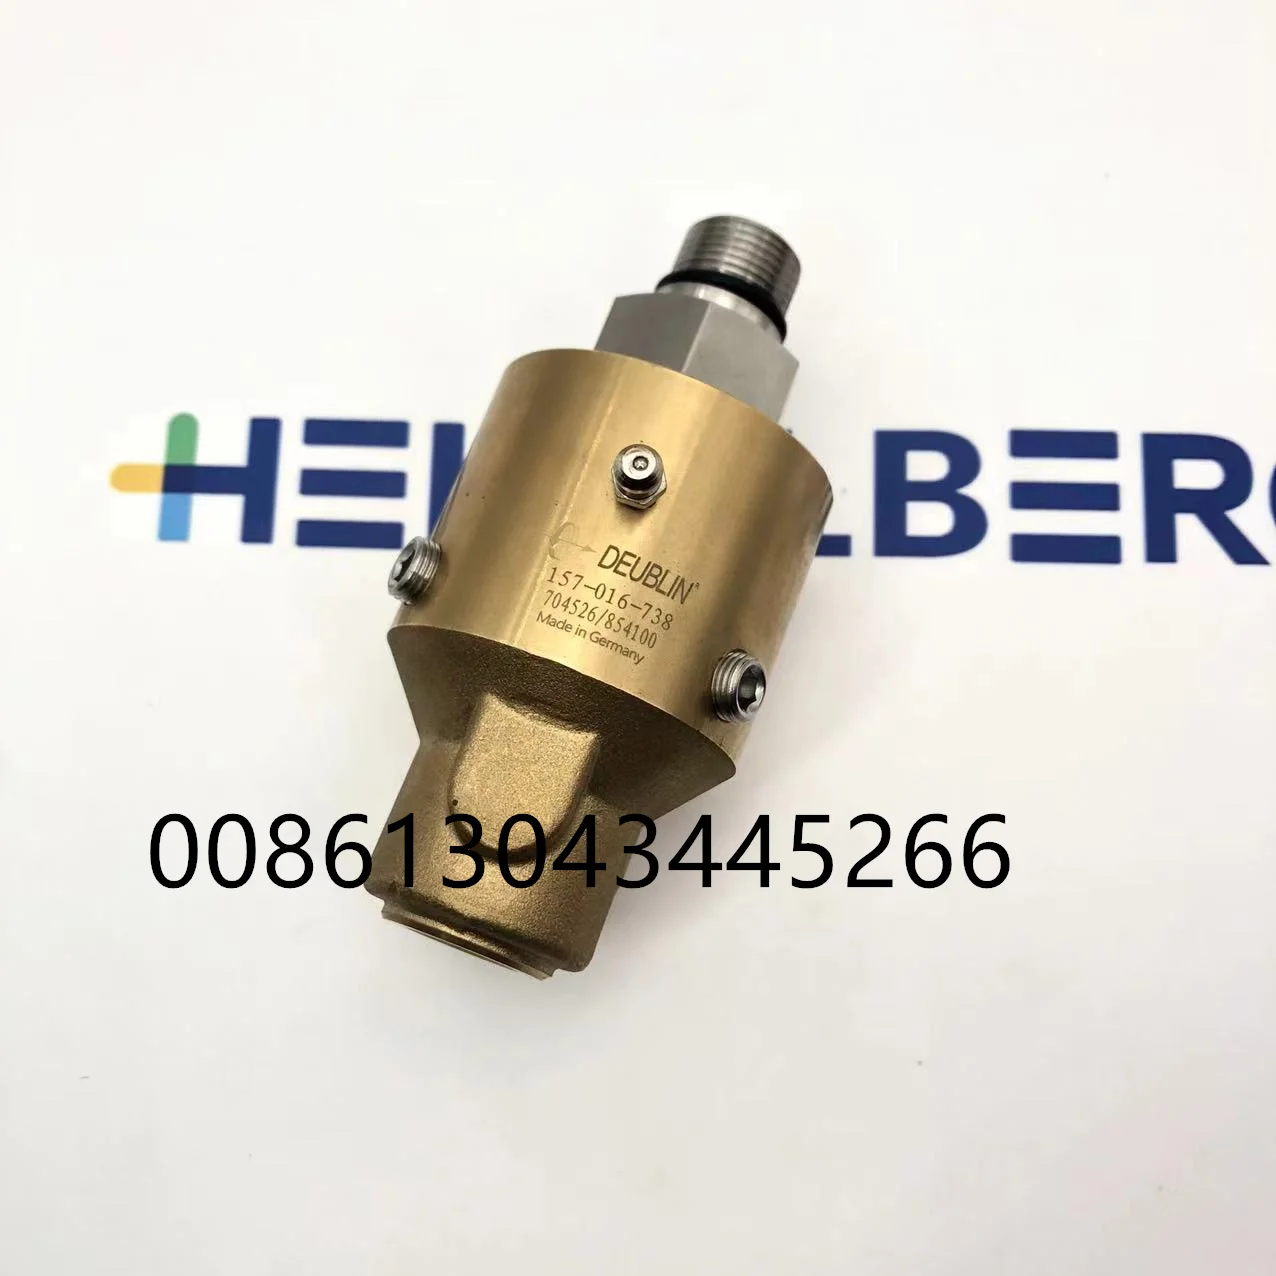 

Best Quality Heidelberg H0247 Rotary union 157-016-738 CD102 printing parts Alcohol Cooling Head rotary valve 00.580.2807